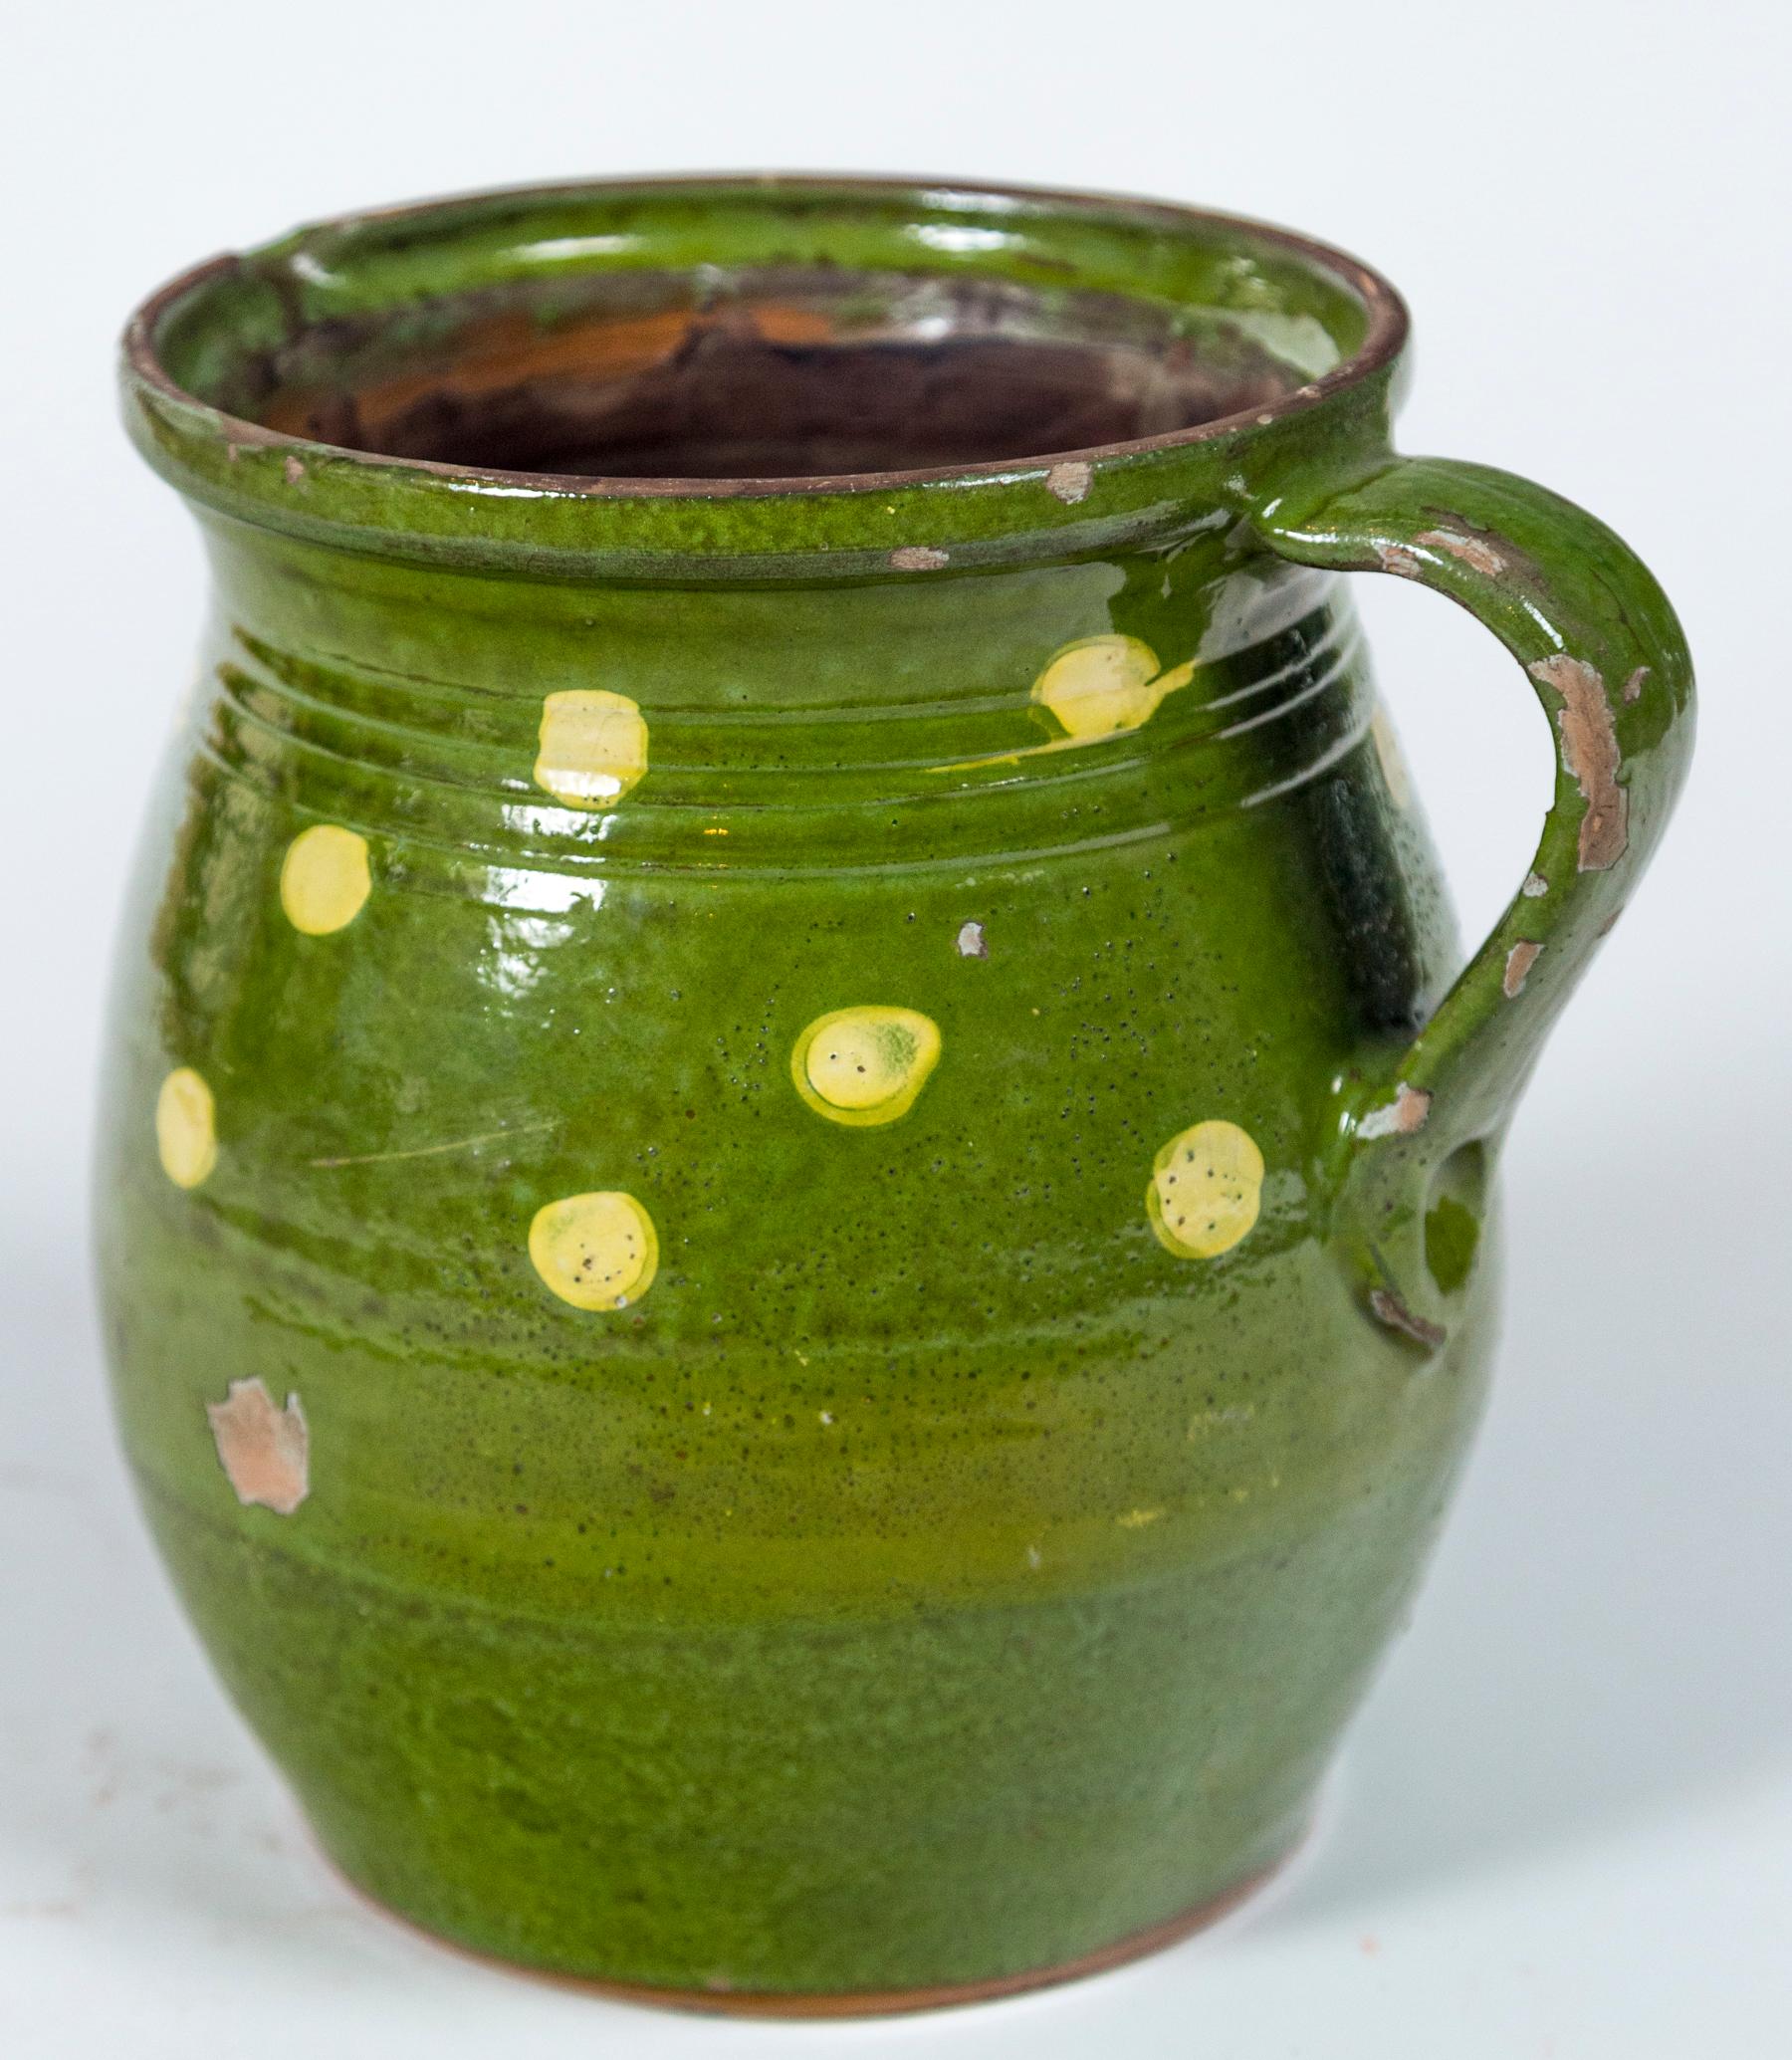 French Jaspé ware dotted pitcher, early 20th Century. Large, bright green glazed pitcher with pale yellow dots.